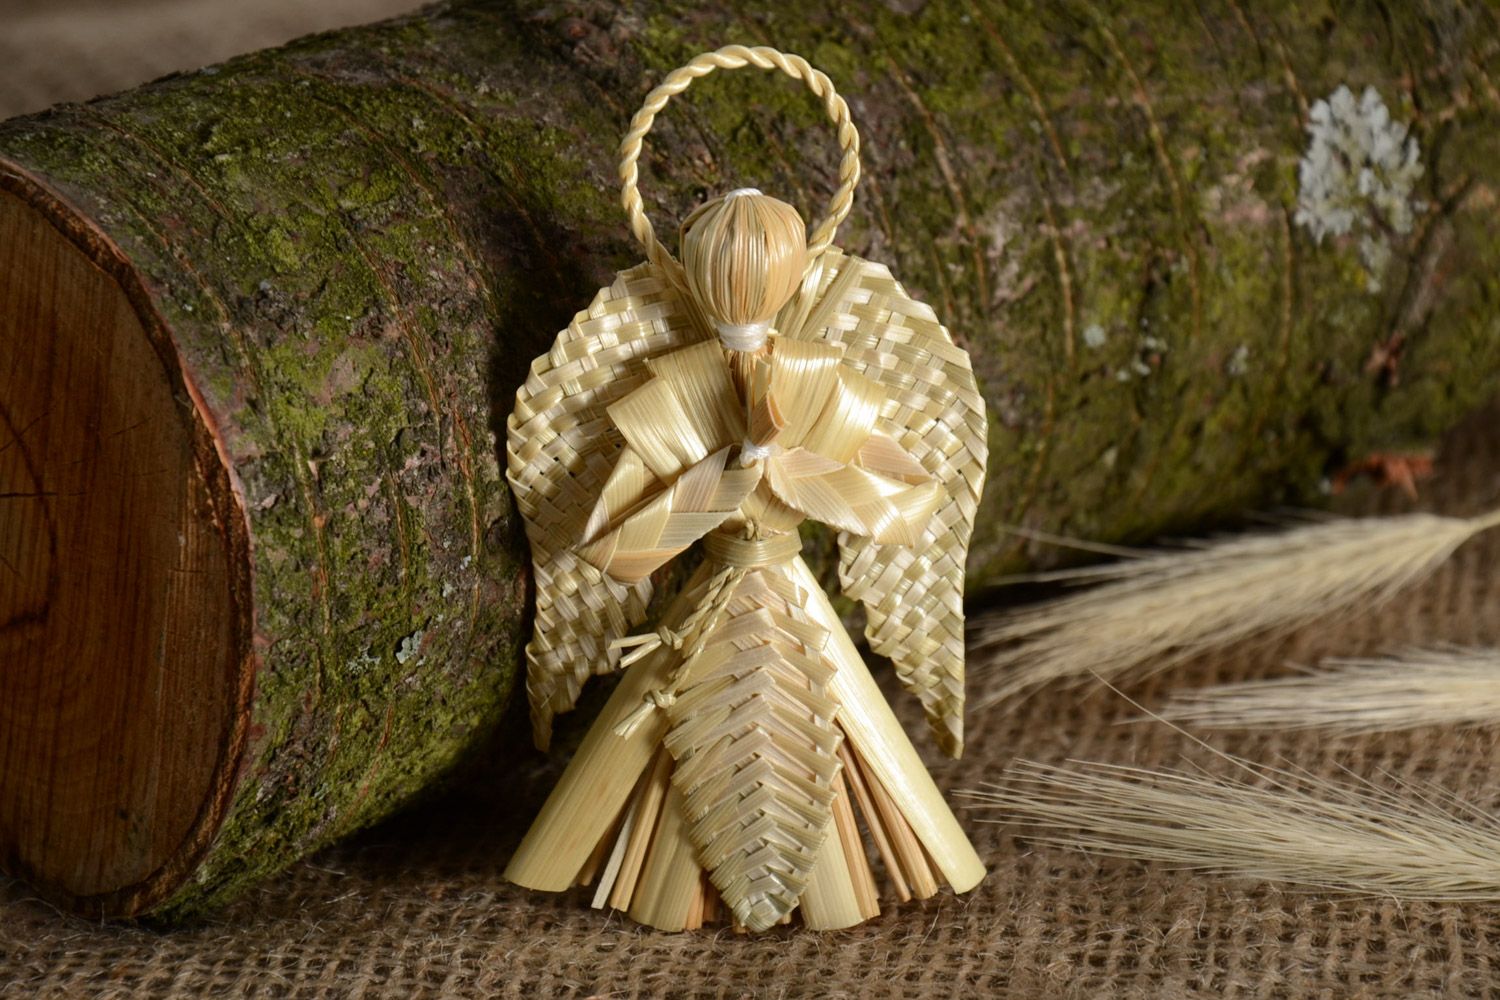 Eco friendly home decoration guardian angel woven of natural straw handmade photo 5